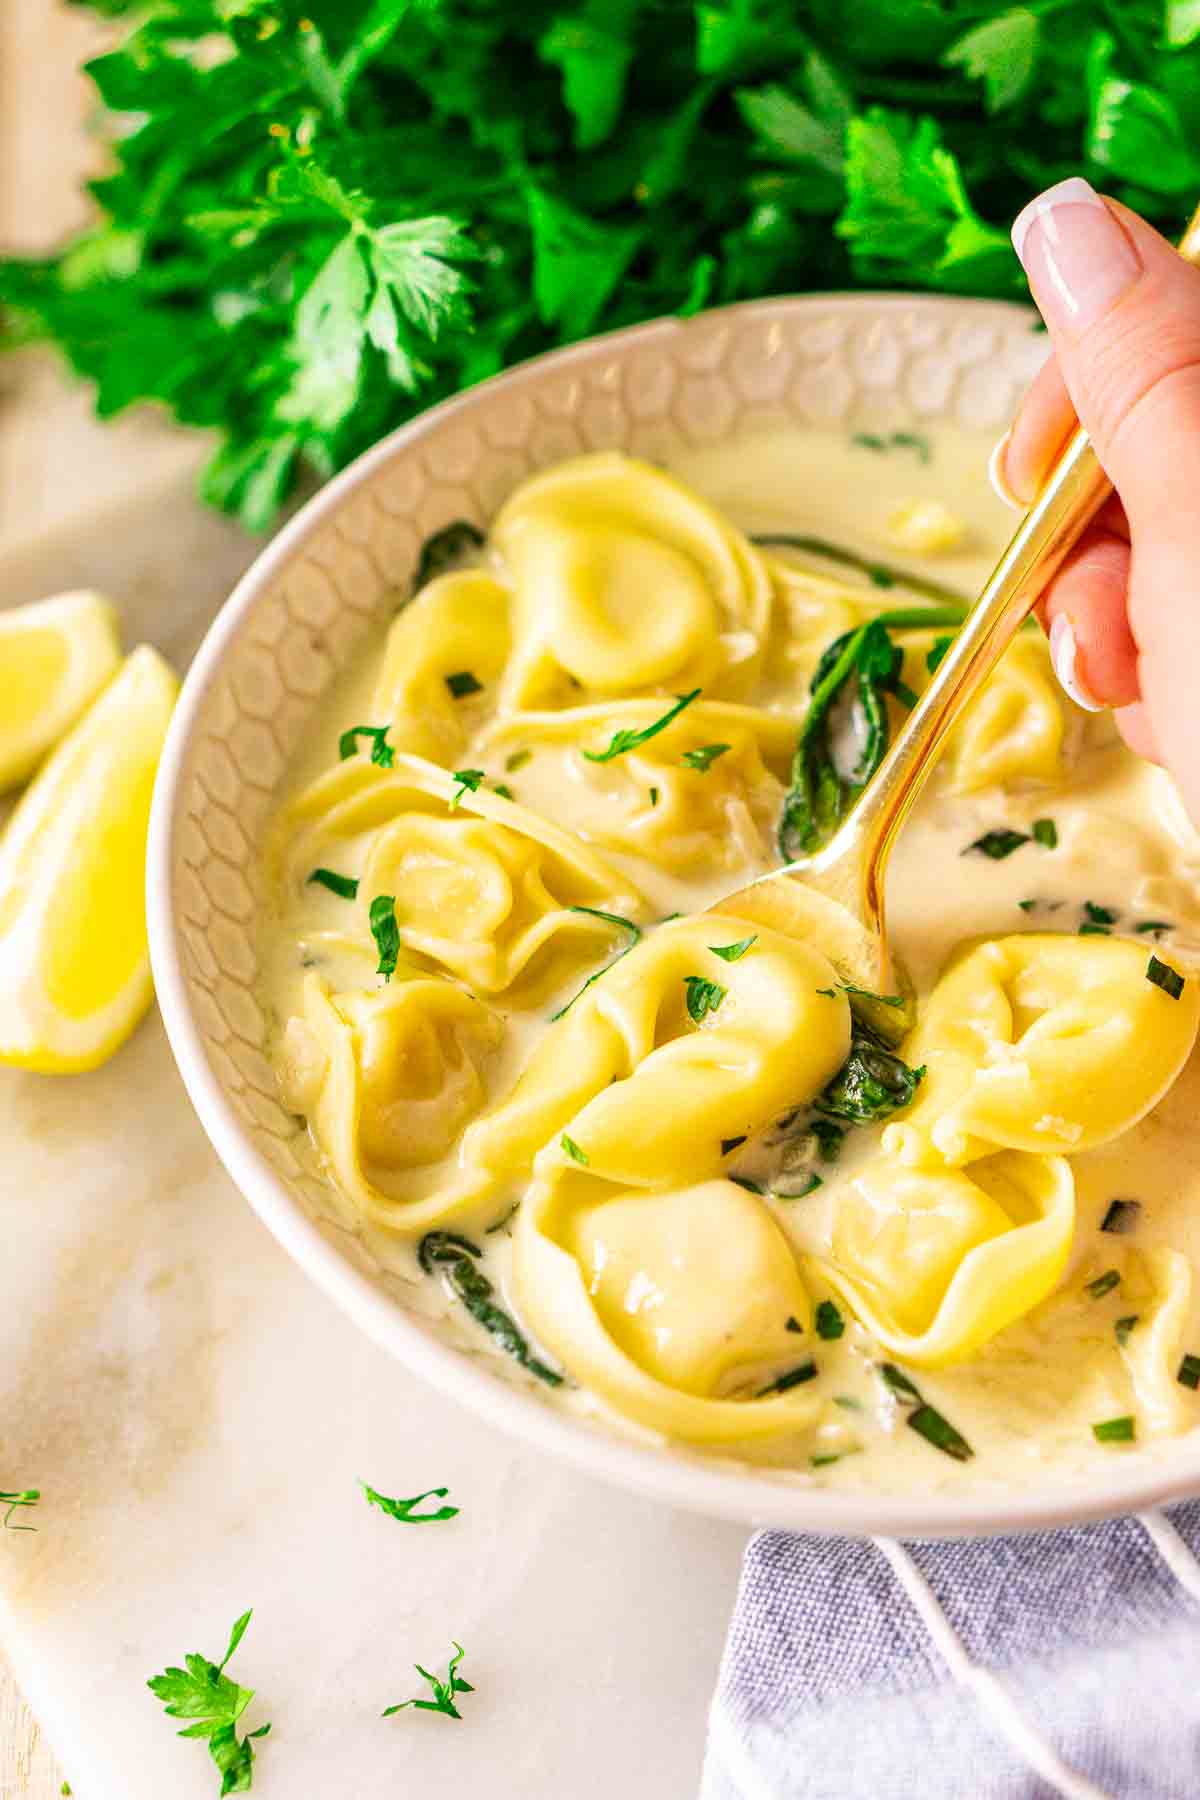 A hand holding a gold spoon dipping into the bowl of tortellini soup with freshly chopped parsley scattered around it.